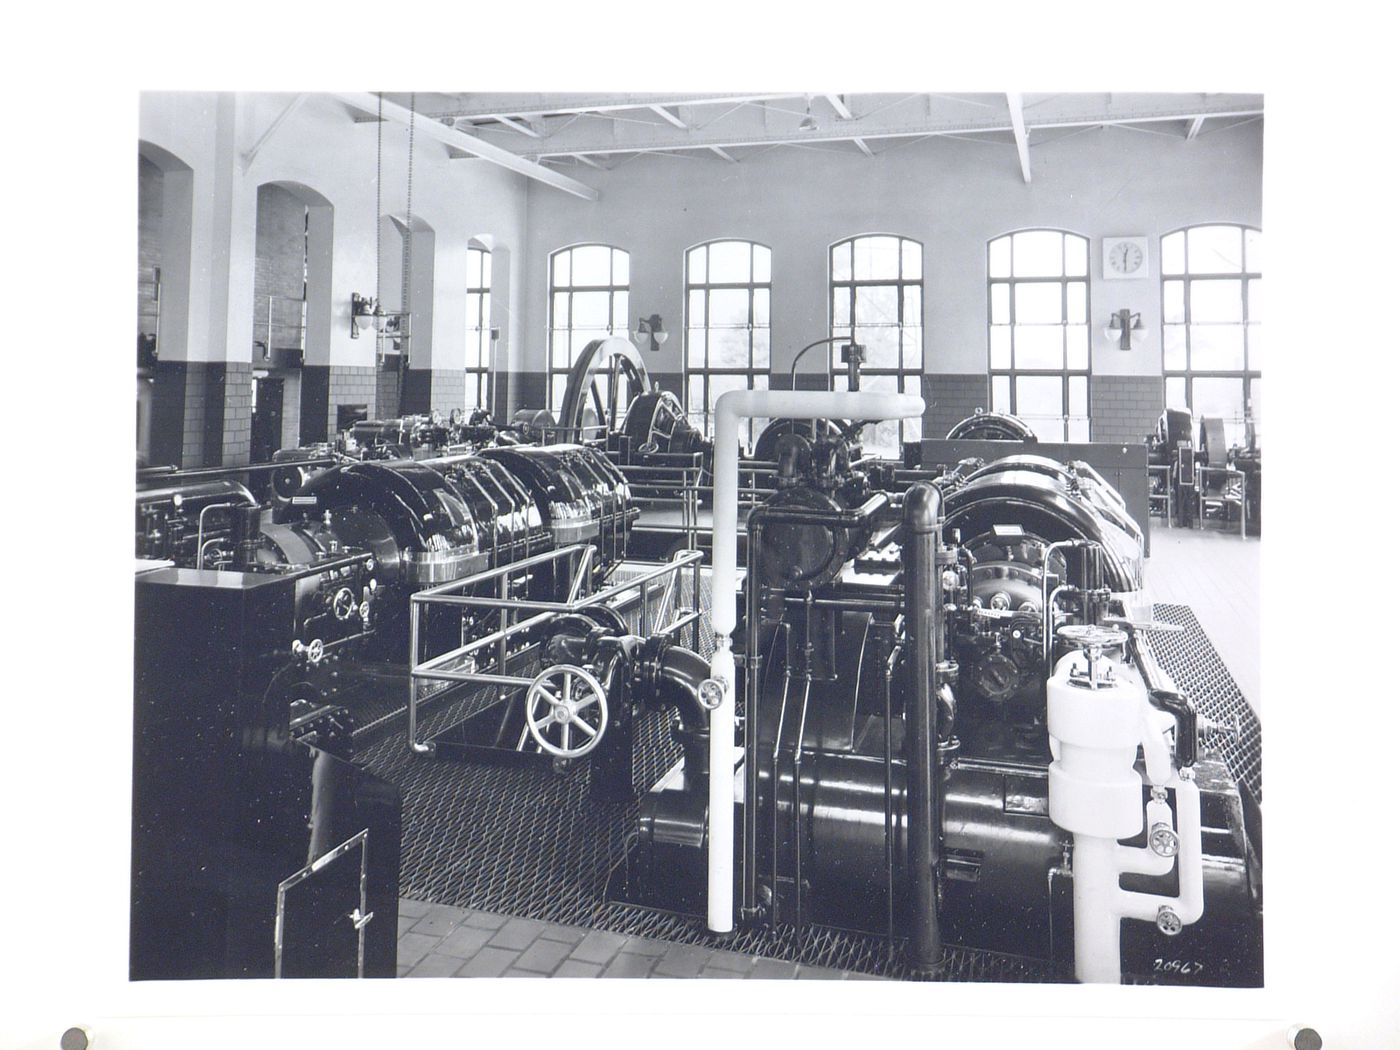 Interior view of machinery in the Engineering Laboratory, Rouge River Plant, Ford Motor Company, Dearborn, Michigan